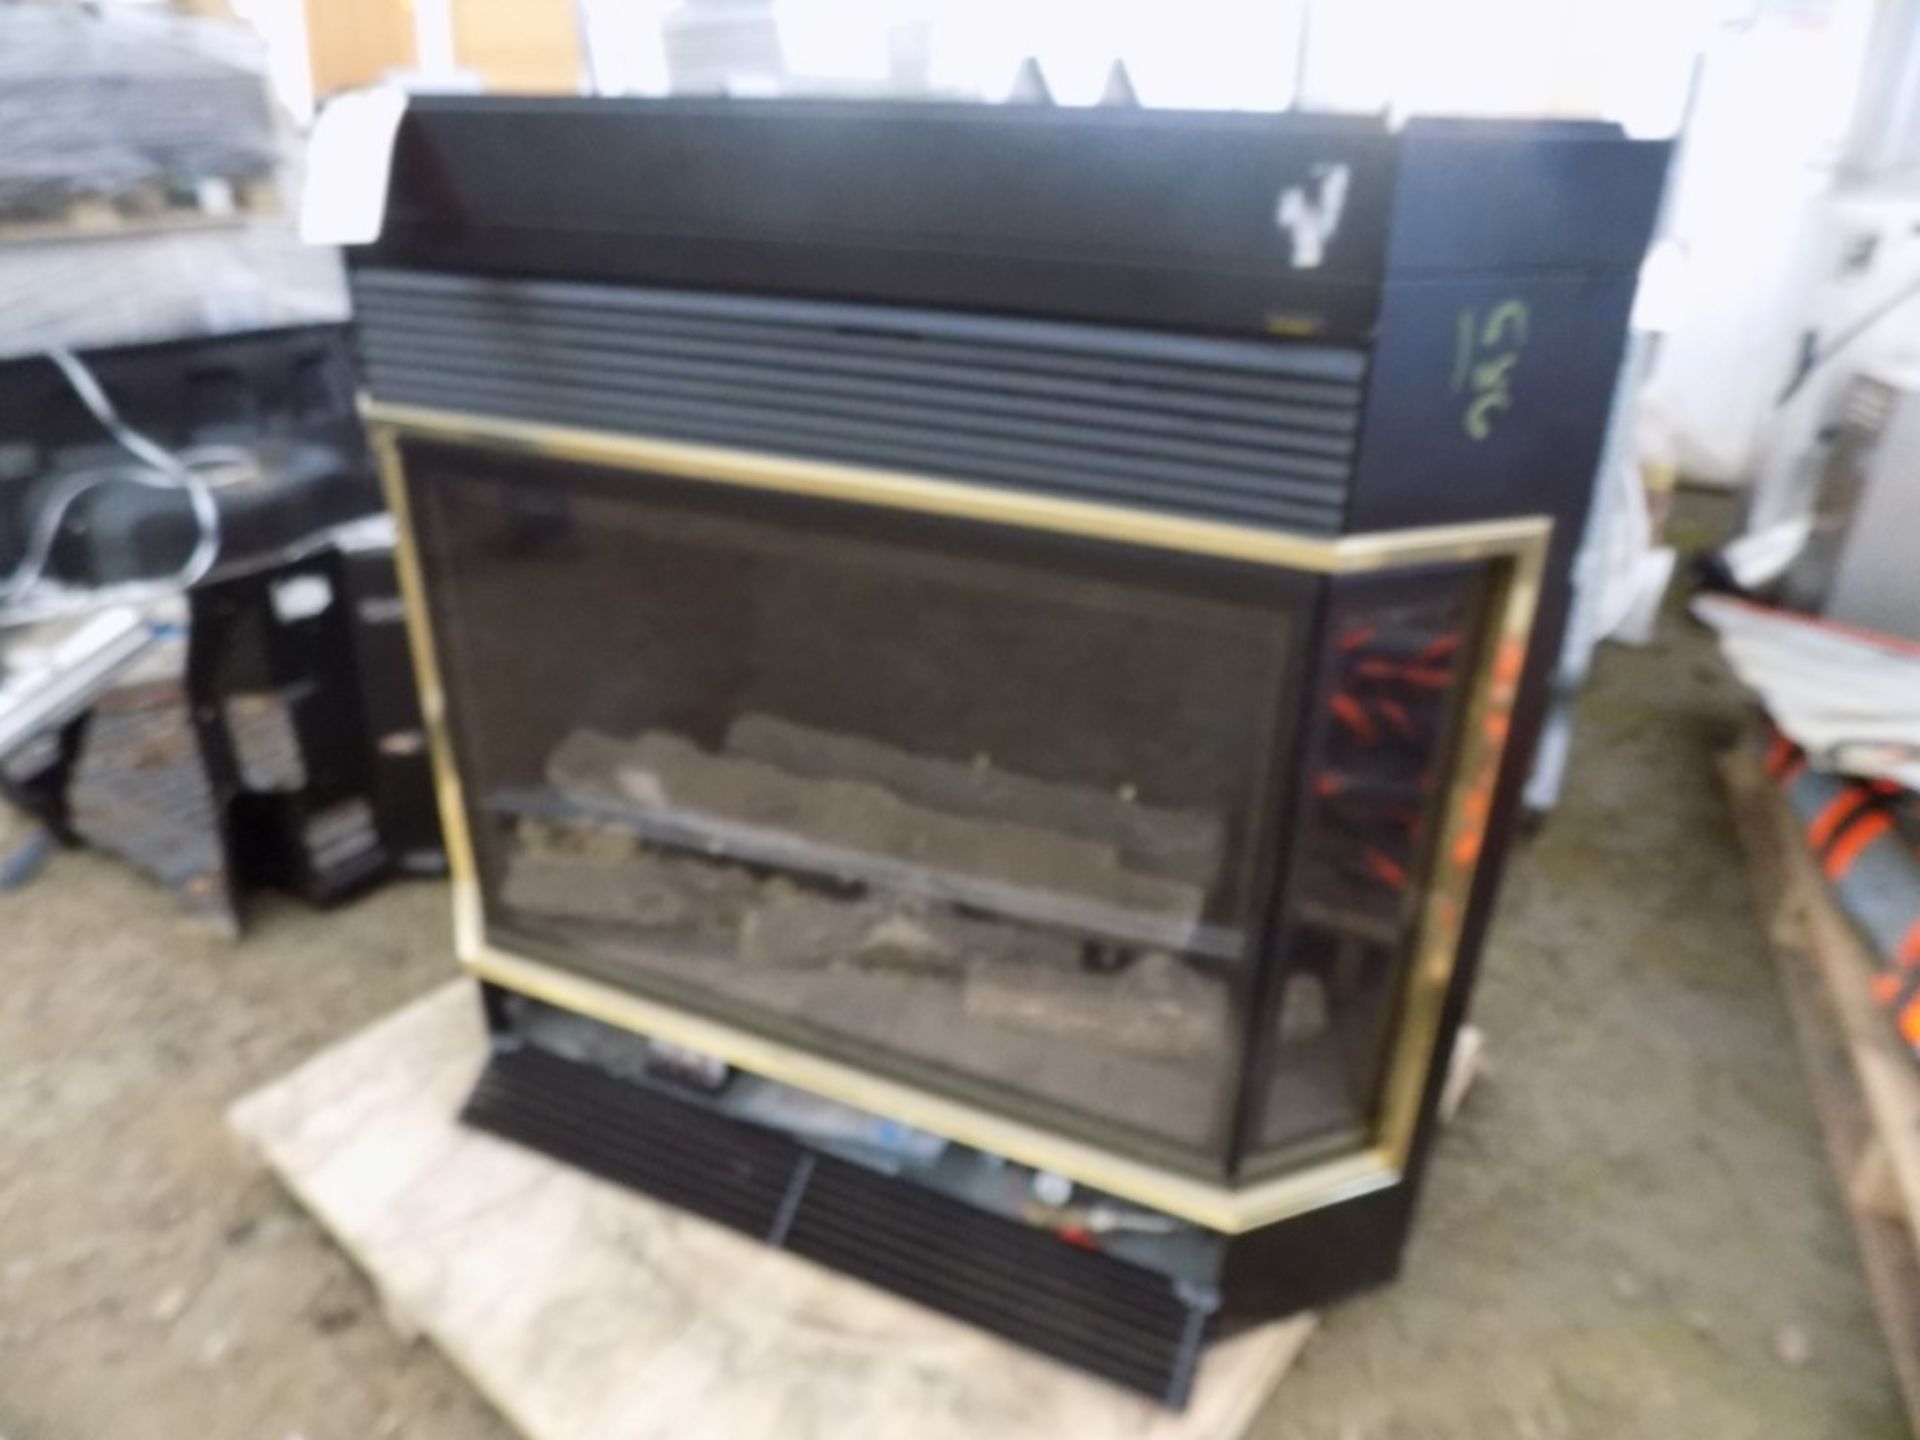 Gas Fireplace Insert, Nice Condition (Tent)